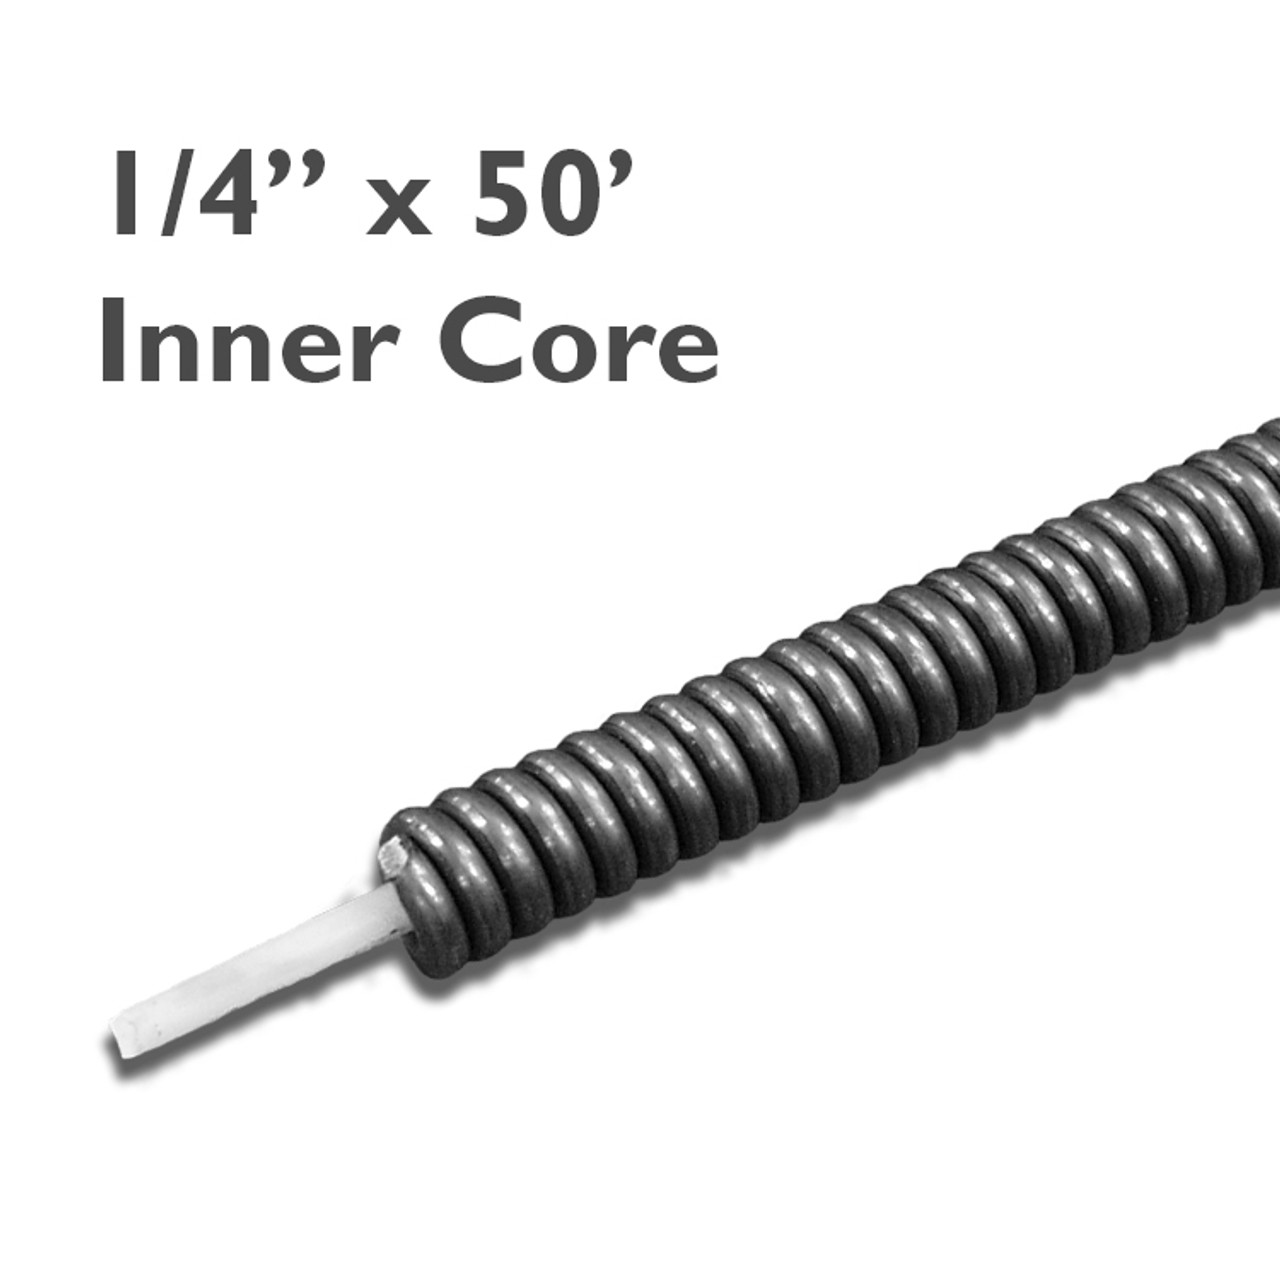 Inner Core Drain Cable | 1/4 x 50' | Duracable Manufacturing Co